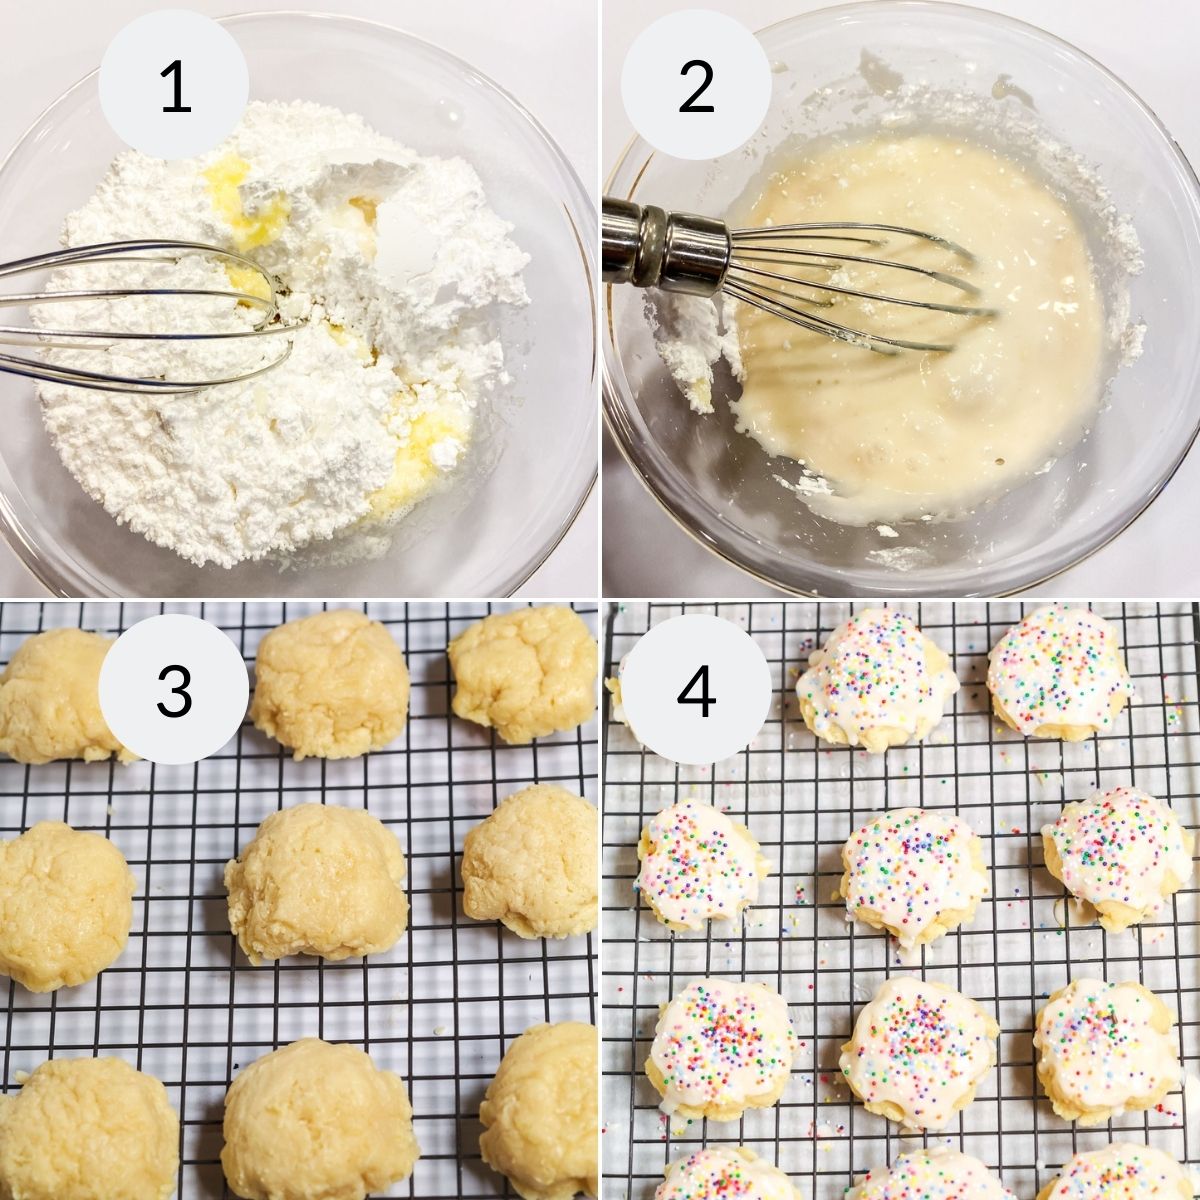 Icing and decorating the lemon ricotta cookies.